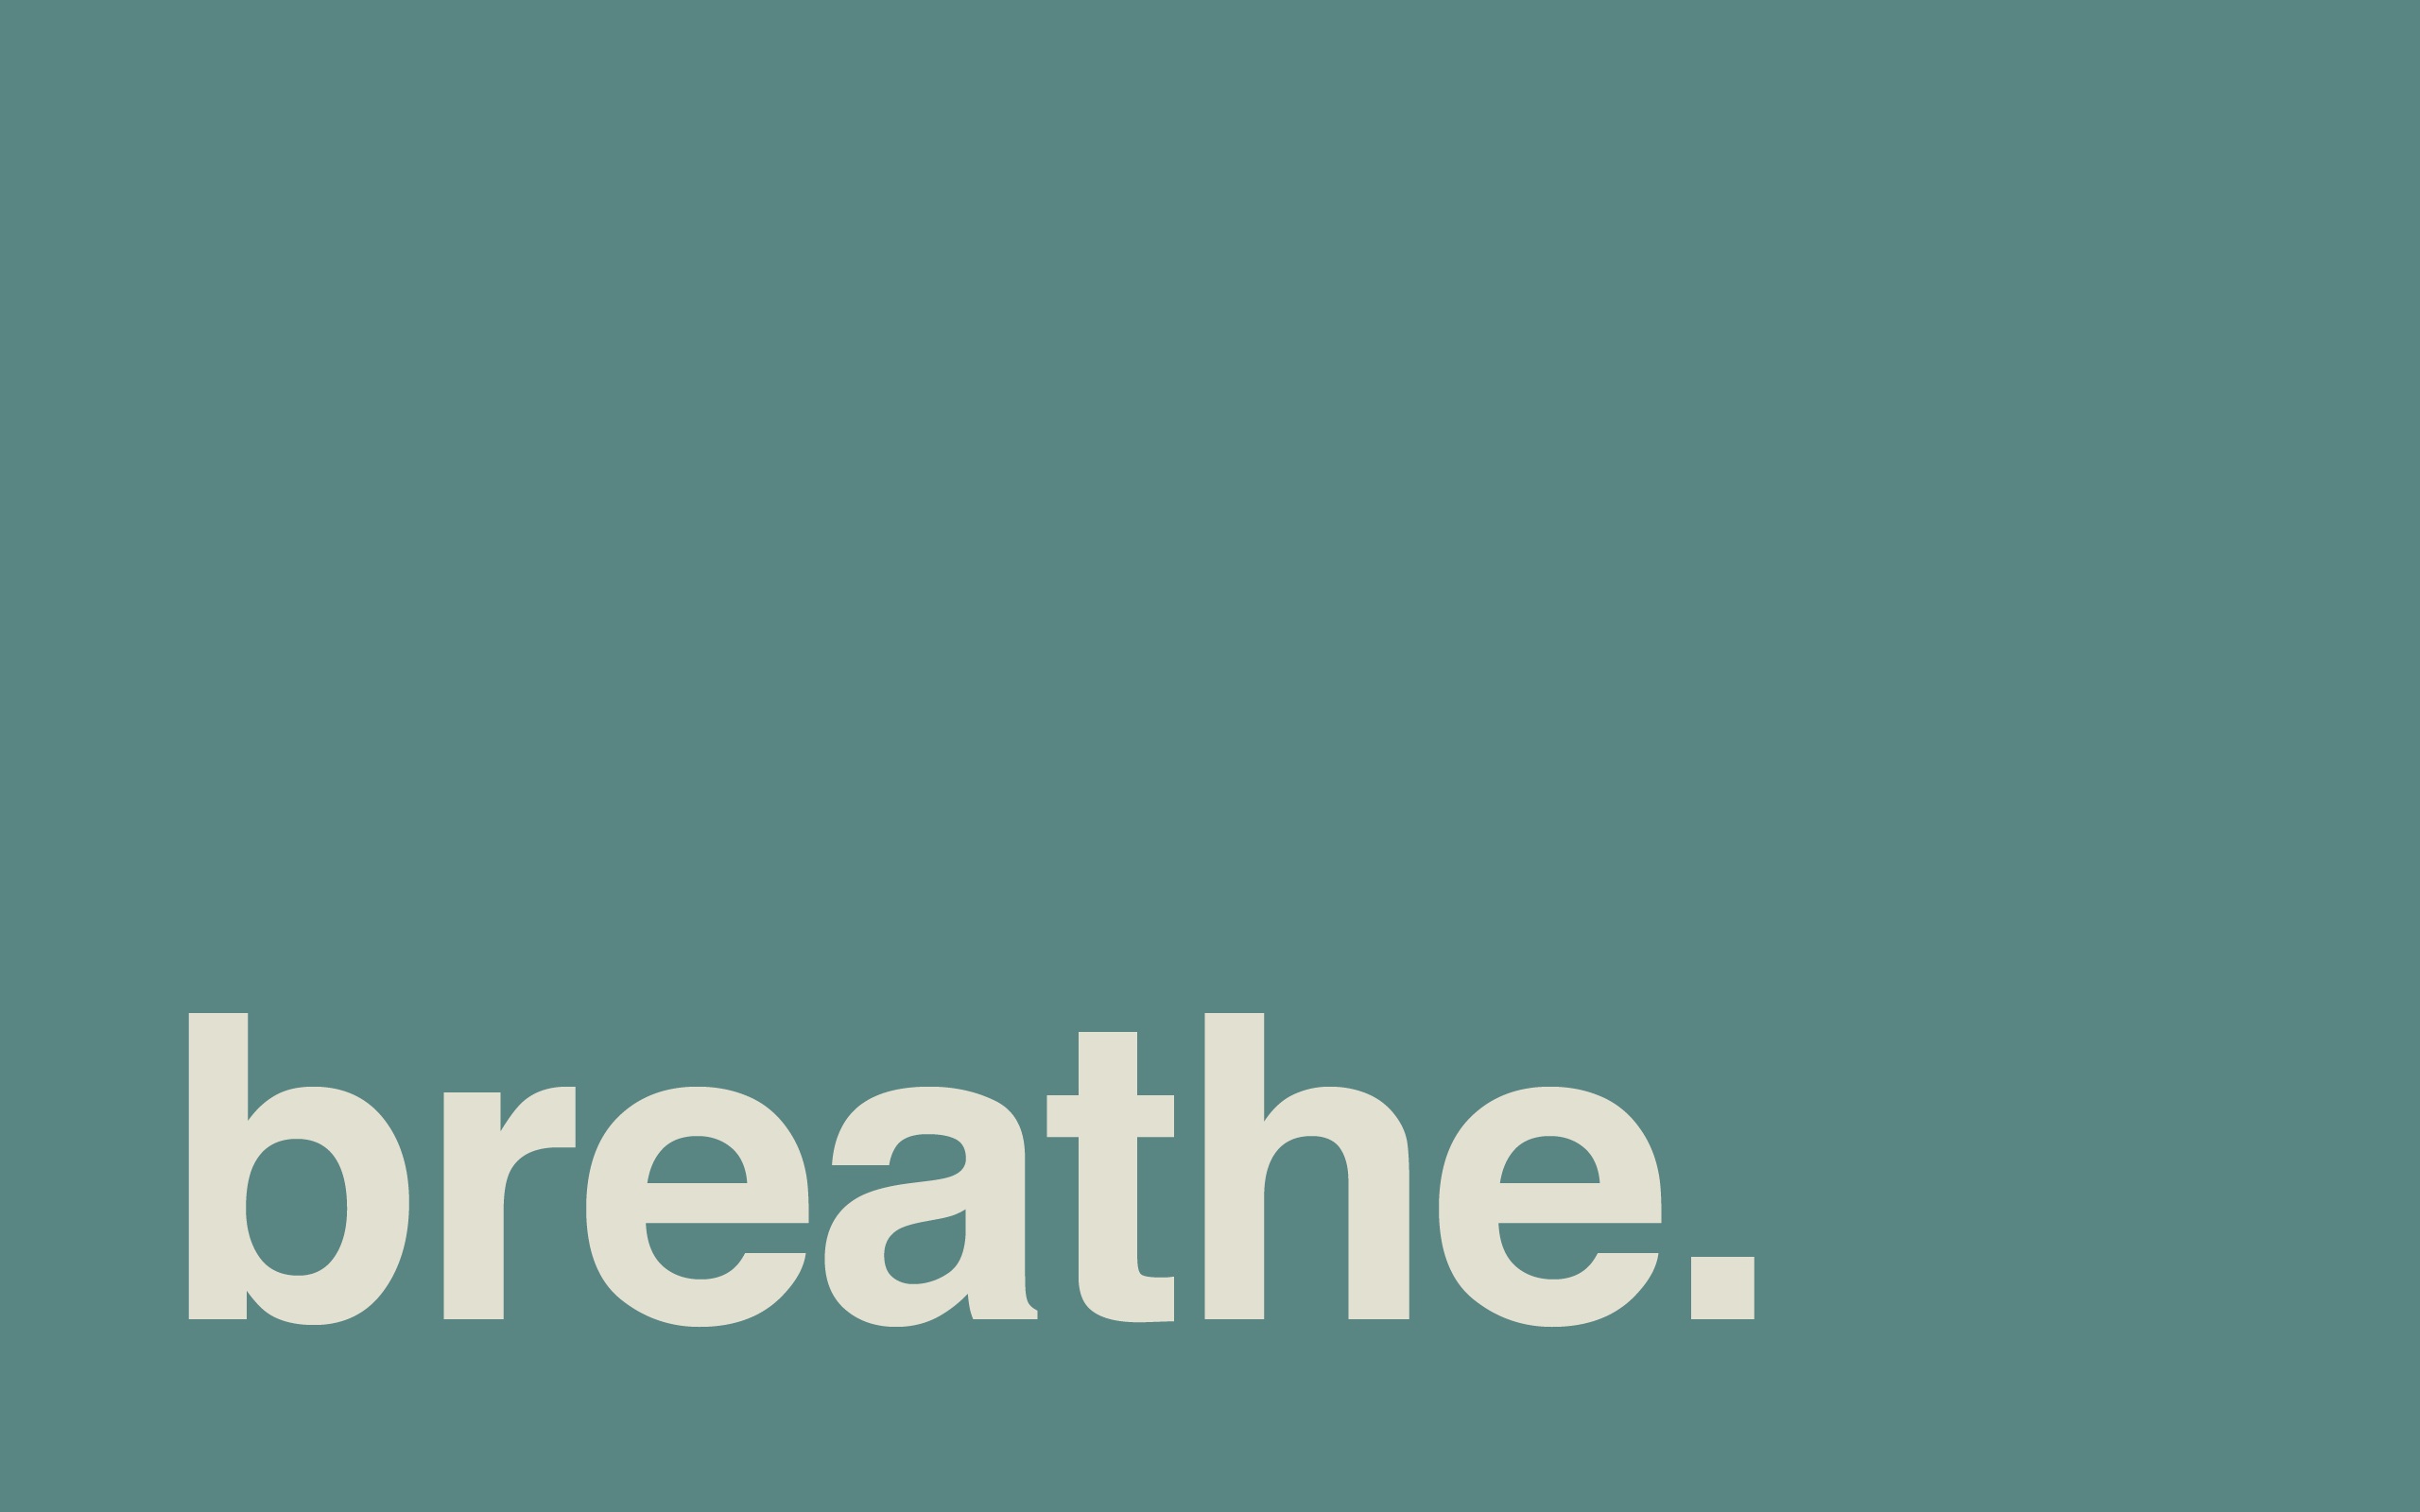 Our one true constant - the breath.